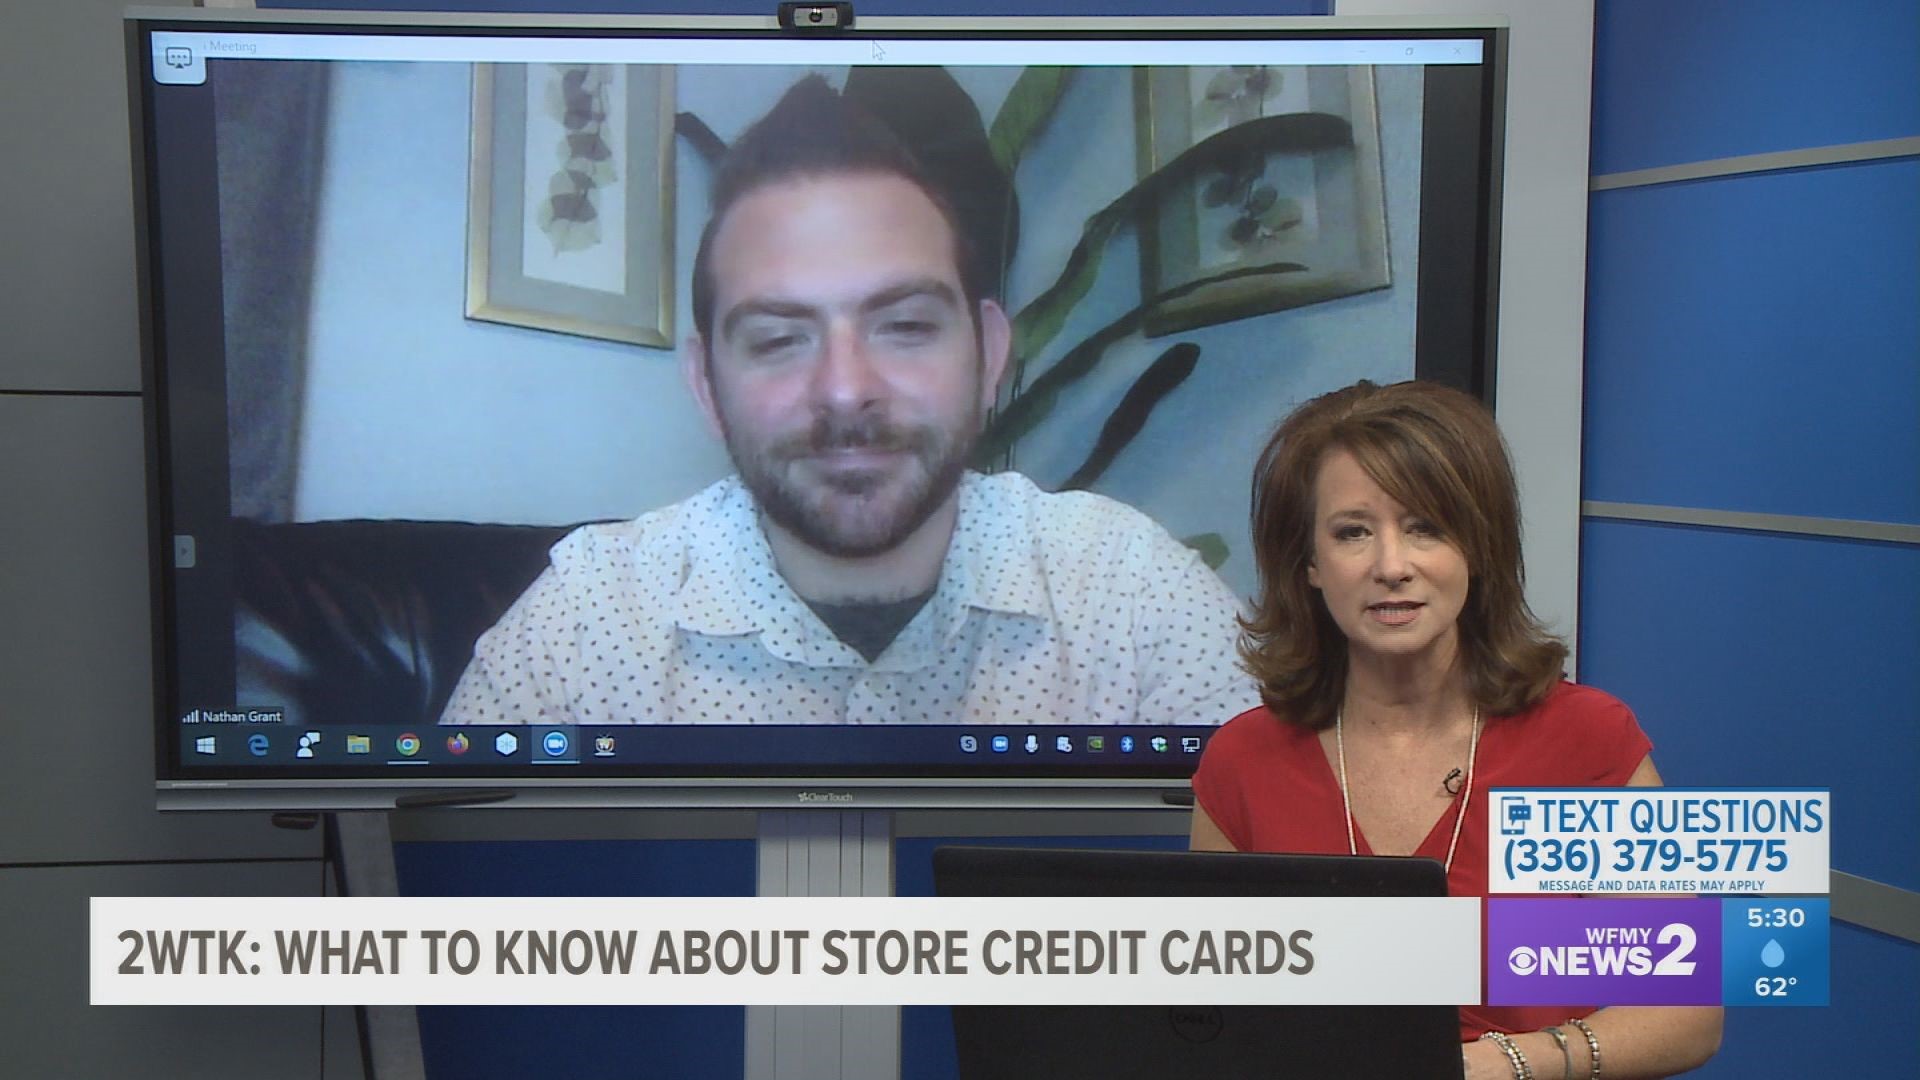 Store credit cards often have way higher interest rates than regular credit cards